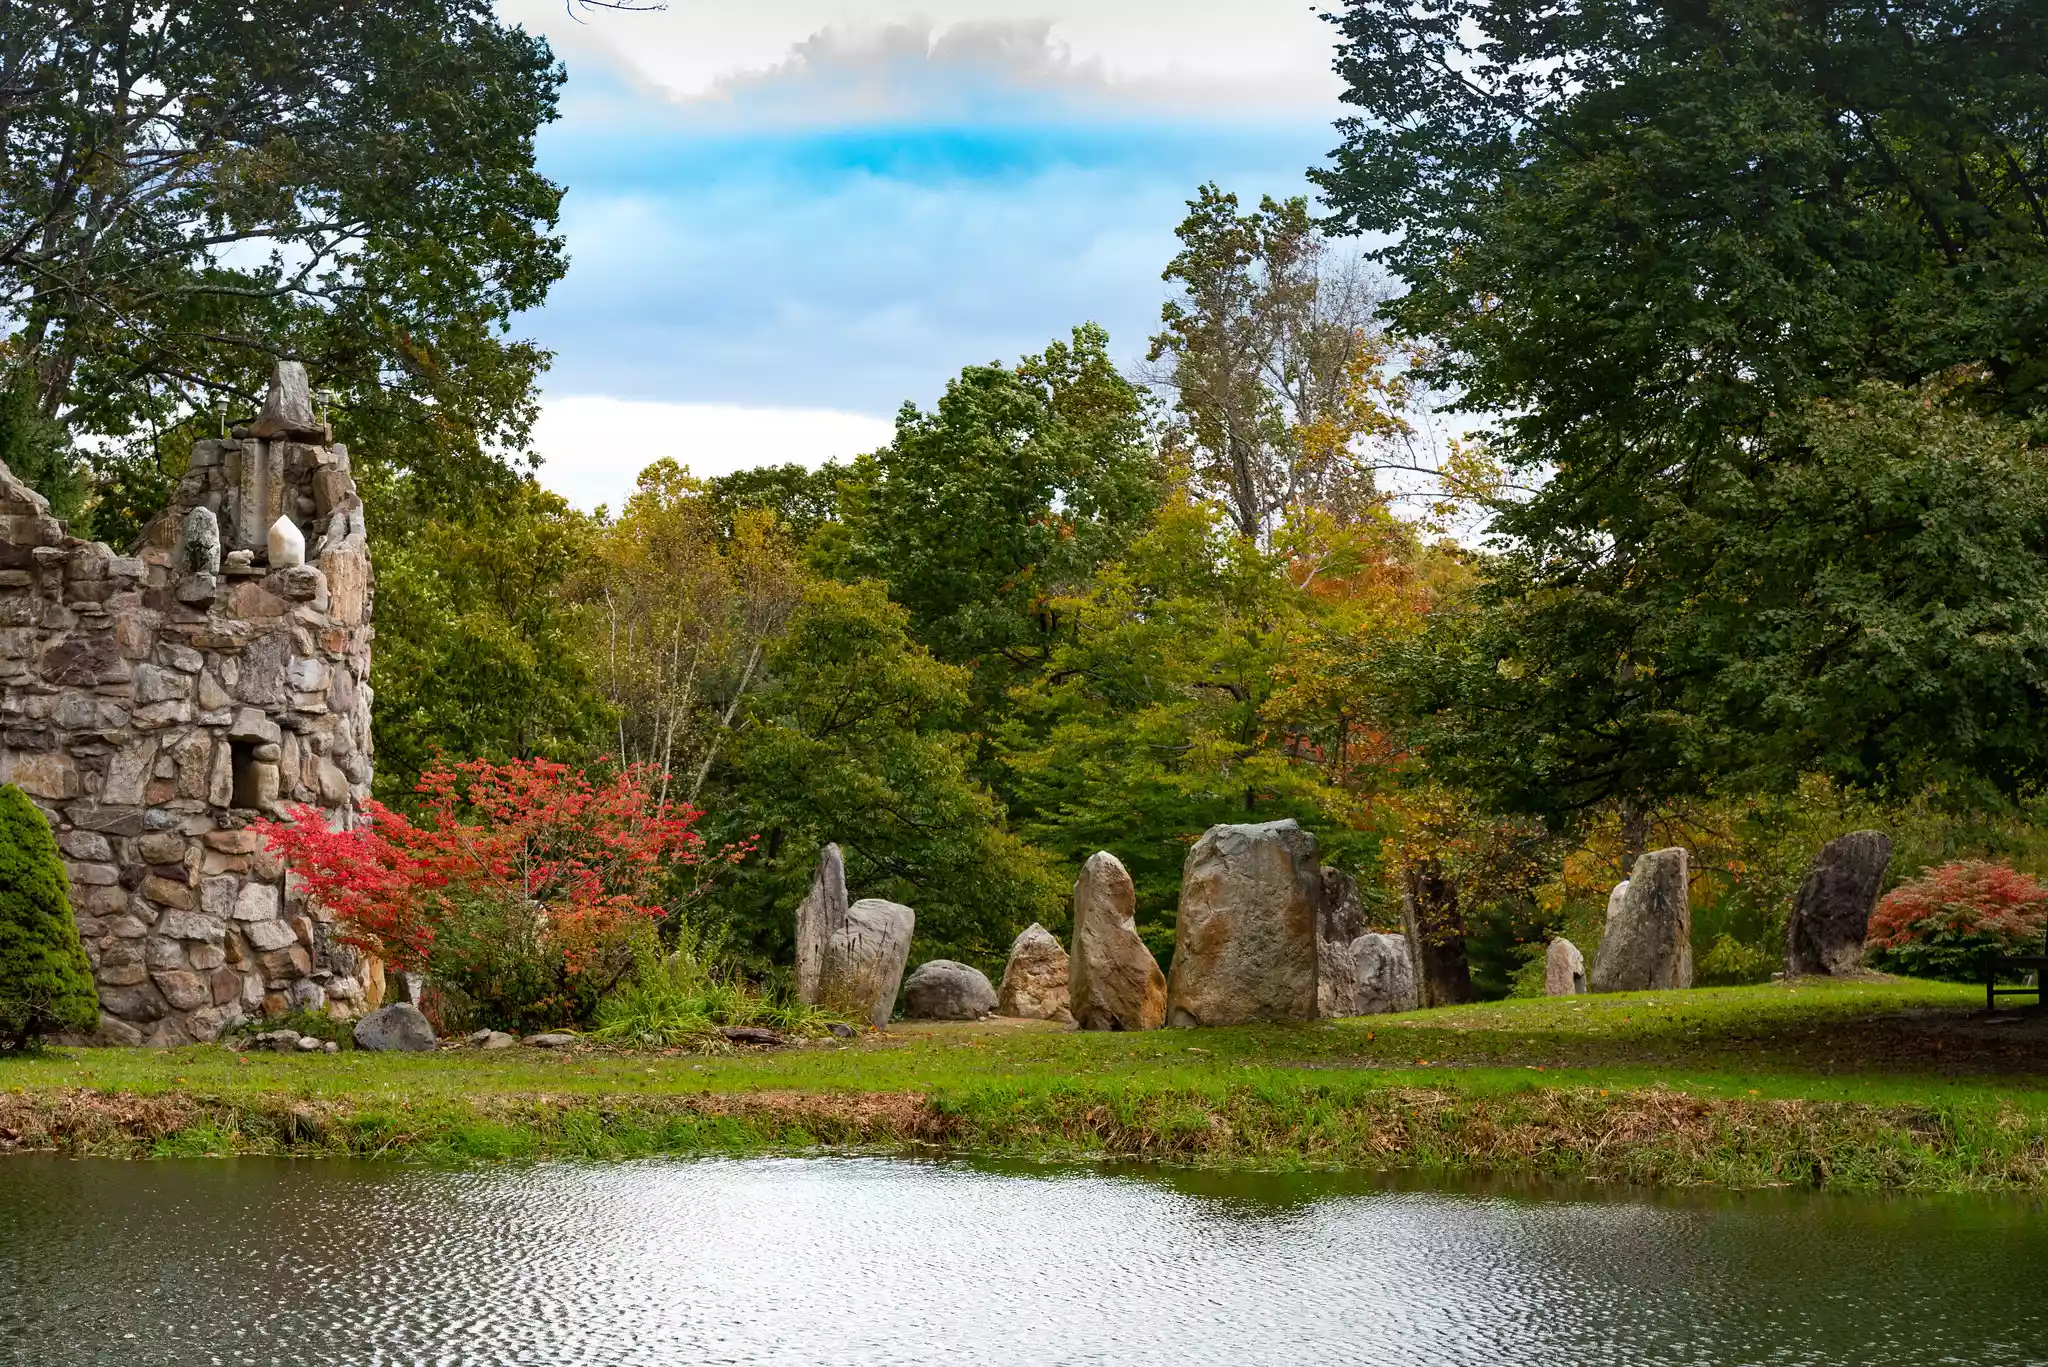 A stone bell tower and circle of stone structures with a pond in the foreground